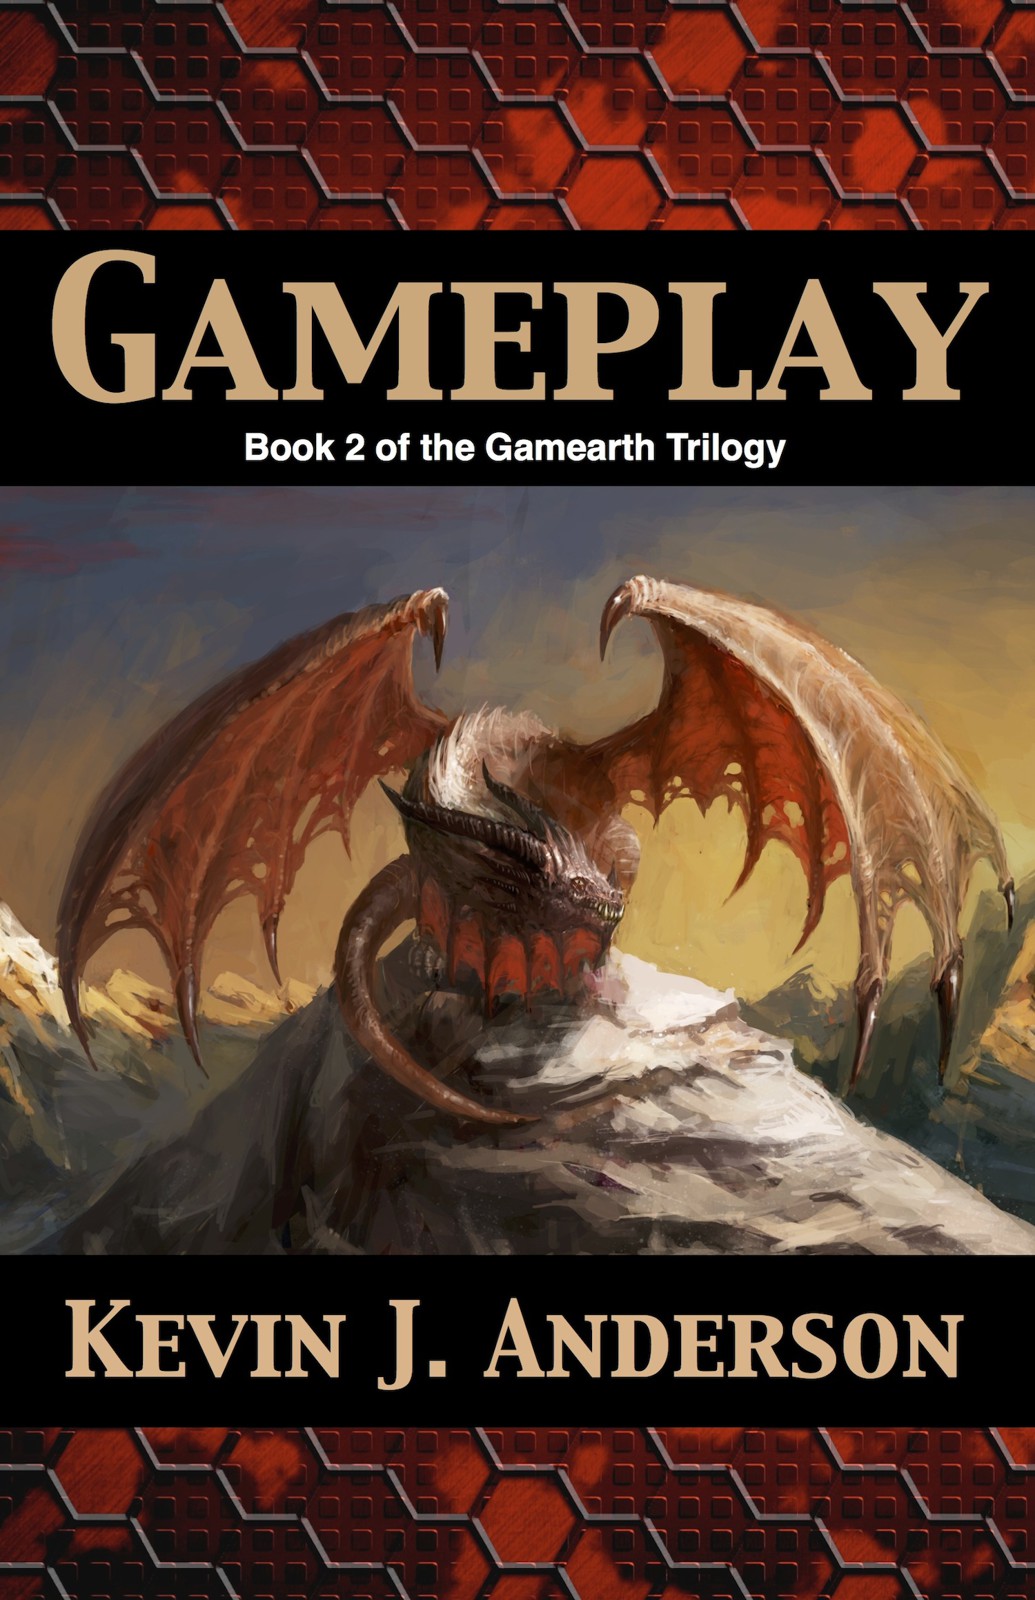 Gameplay by Kevin J. Anderson